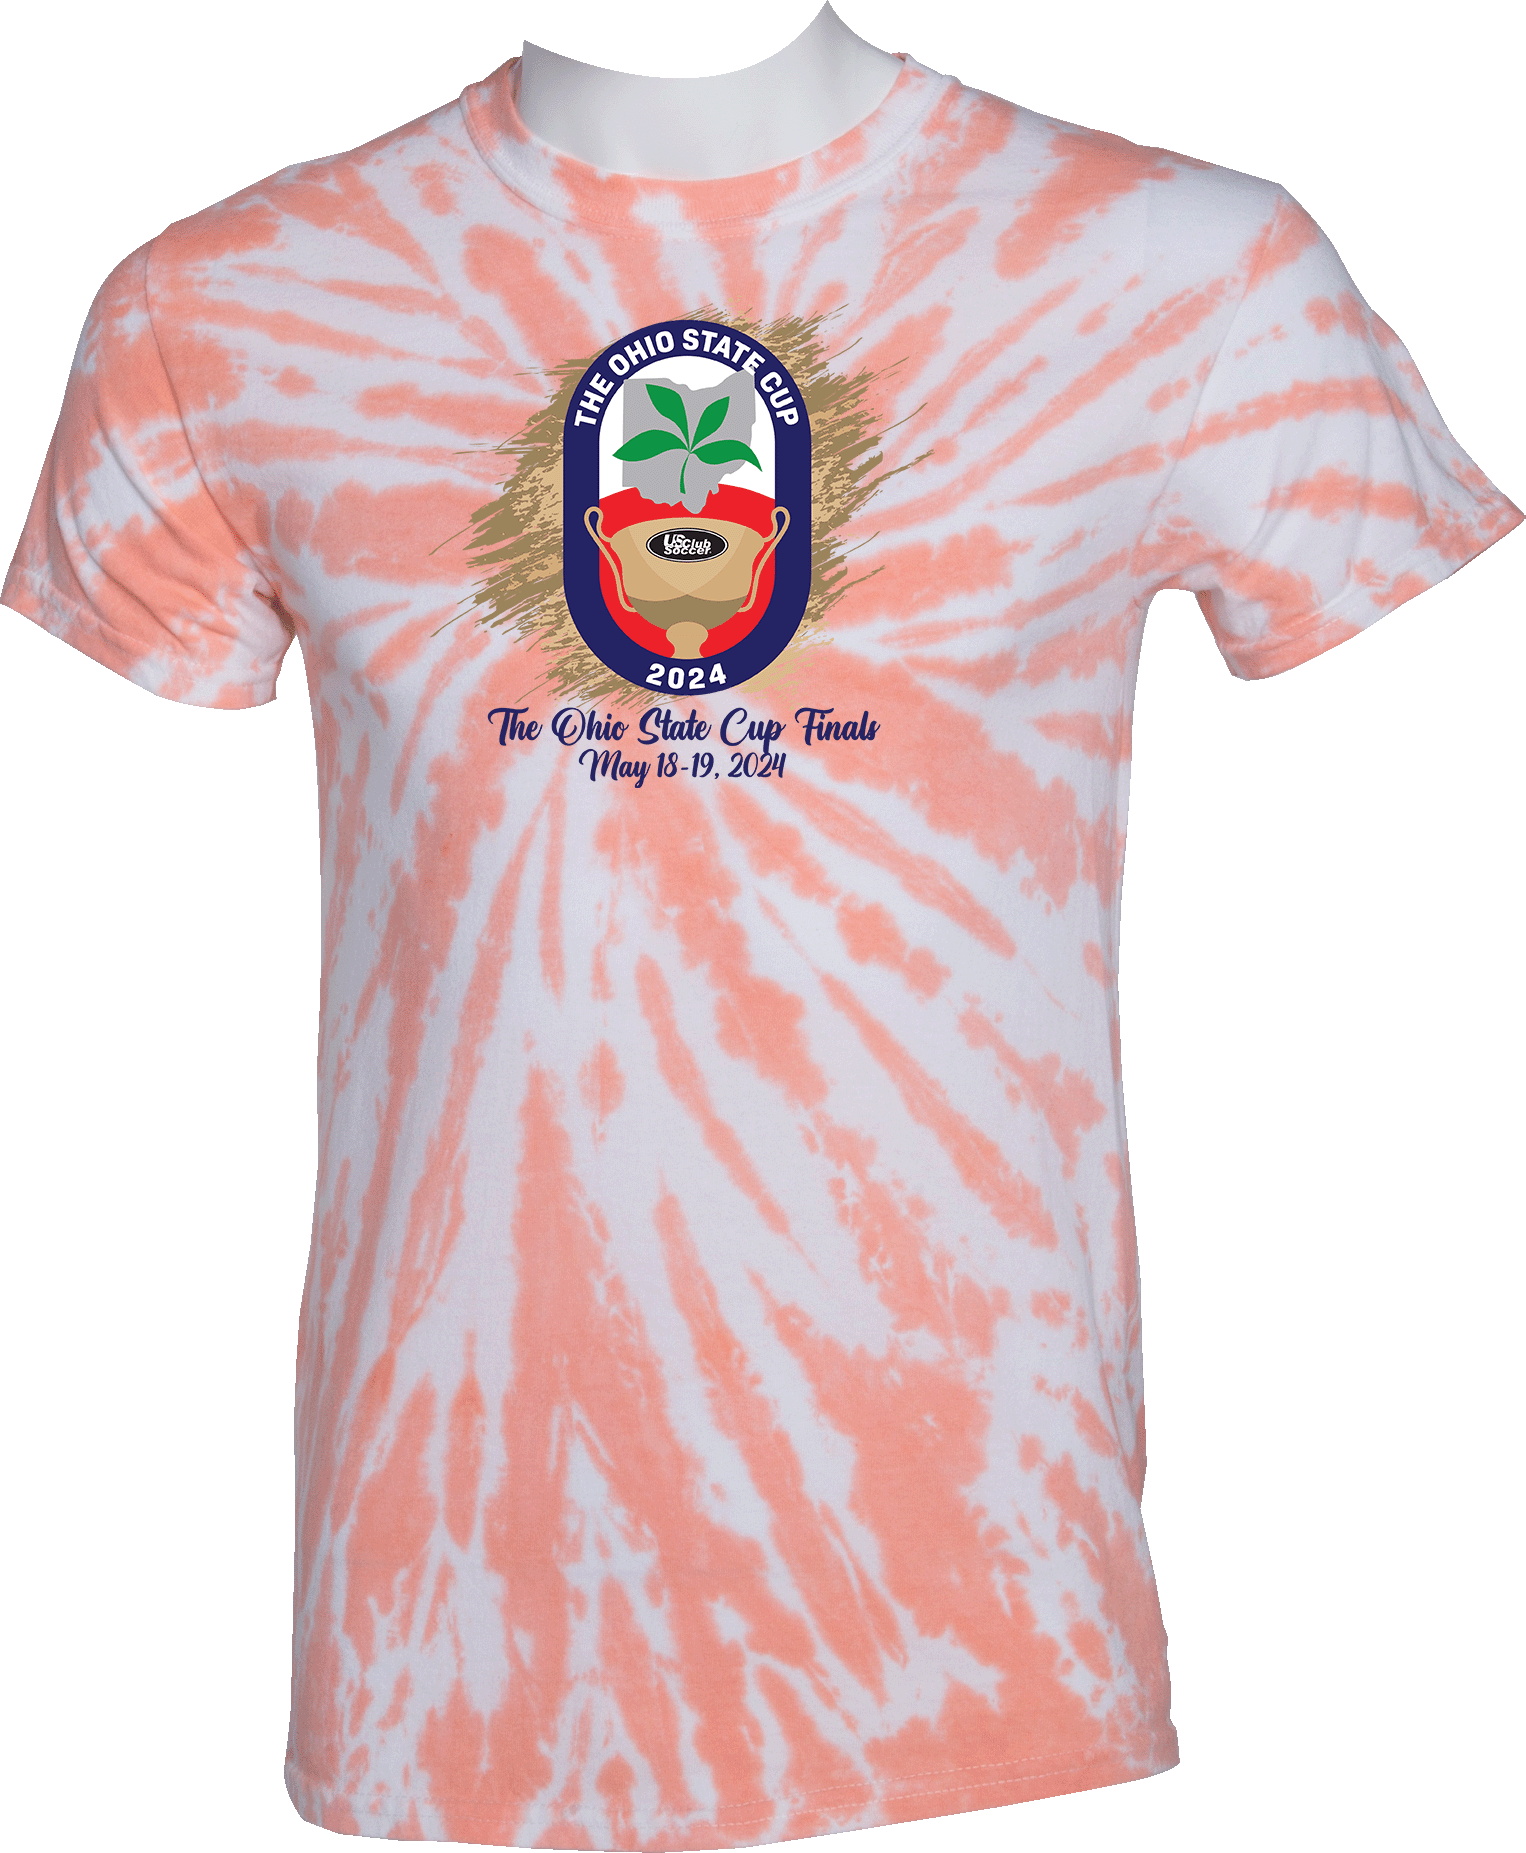 Tie-Dye Short Sleeves - 2024 US Club Ohio State Cup Finals